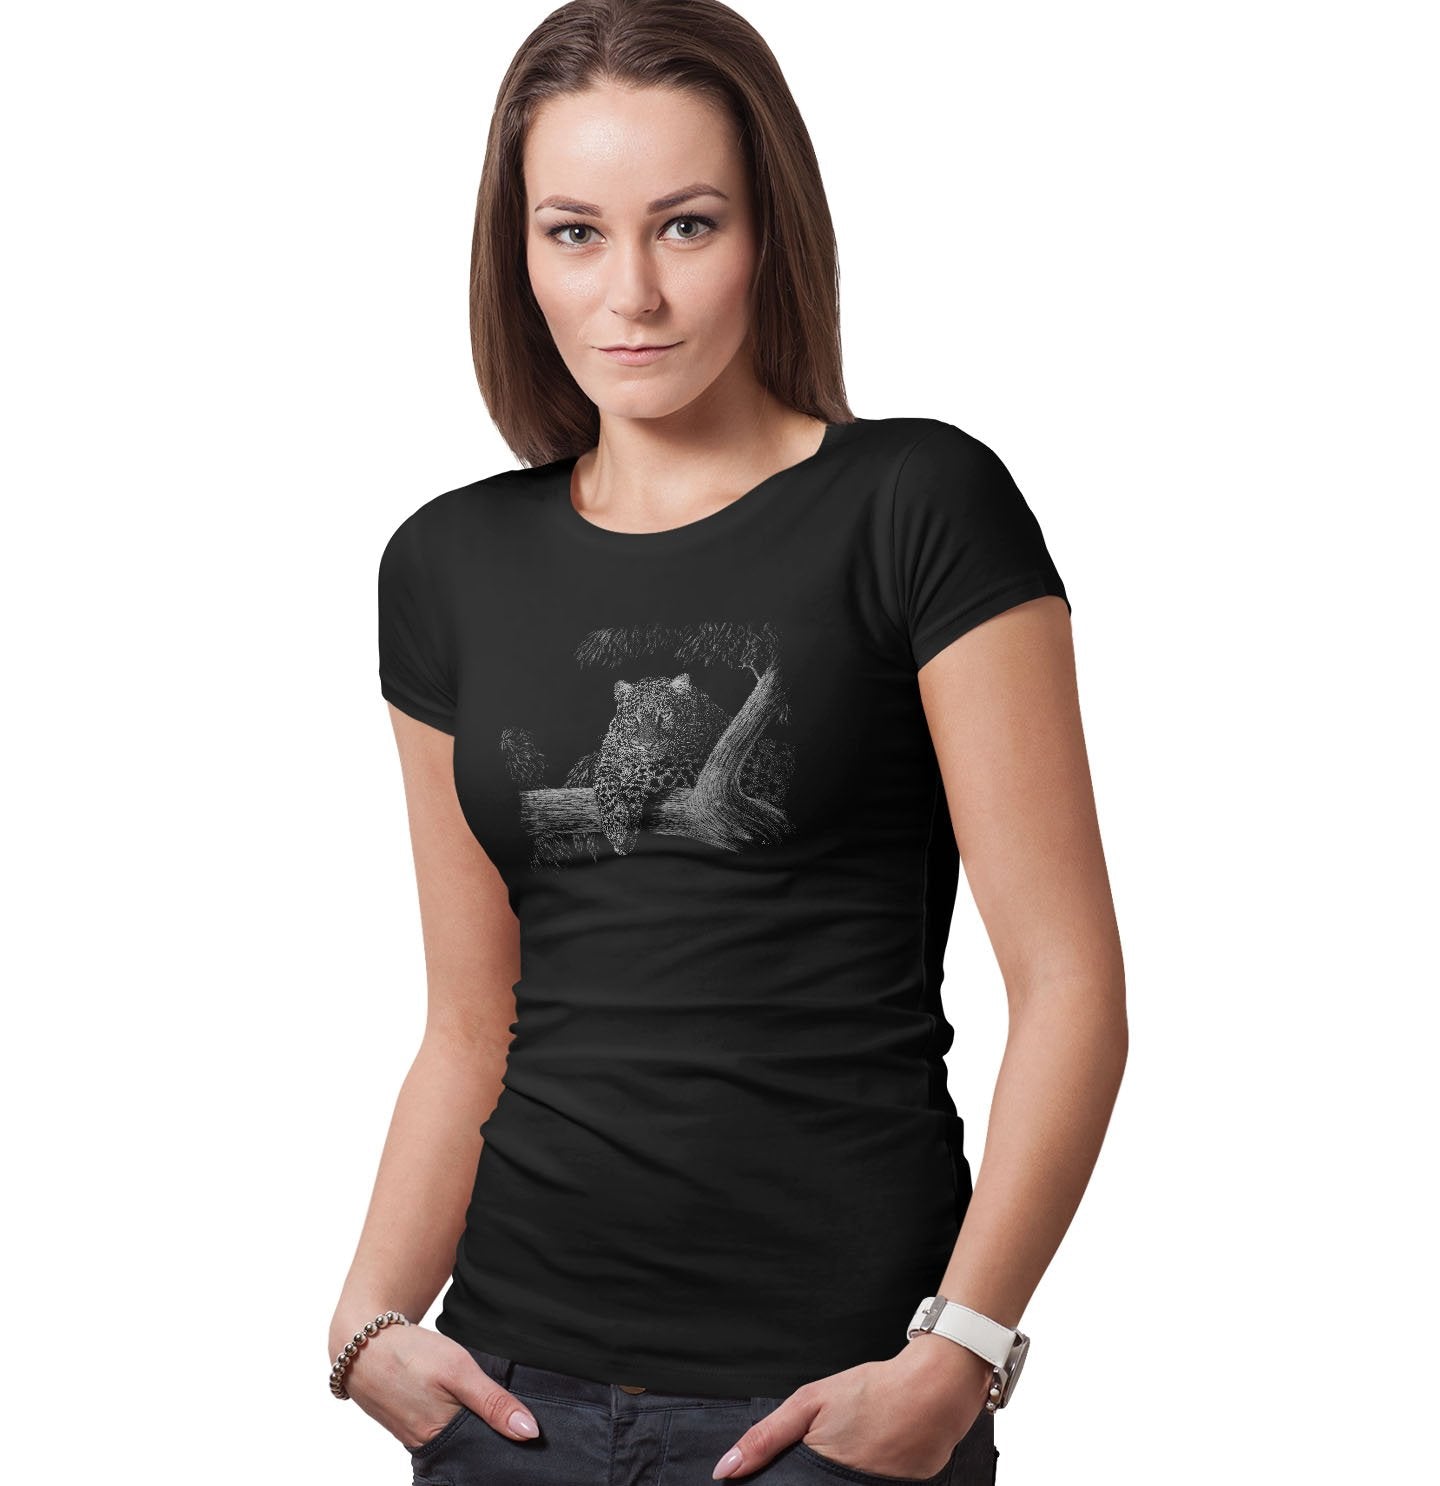 Leopard on Black - Women's Fitted T-Shirt - Animal Tee